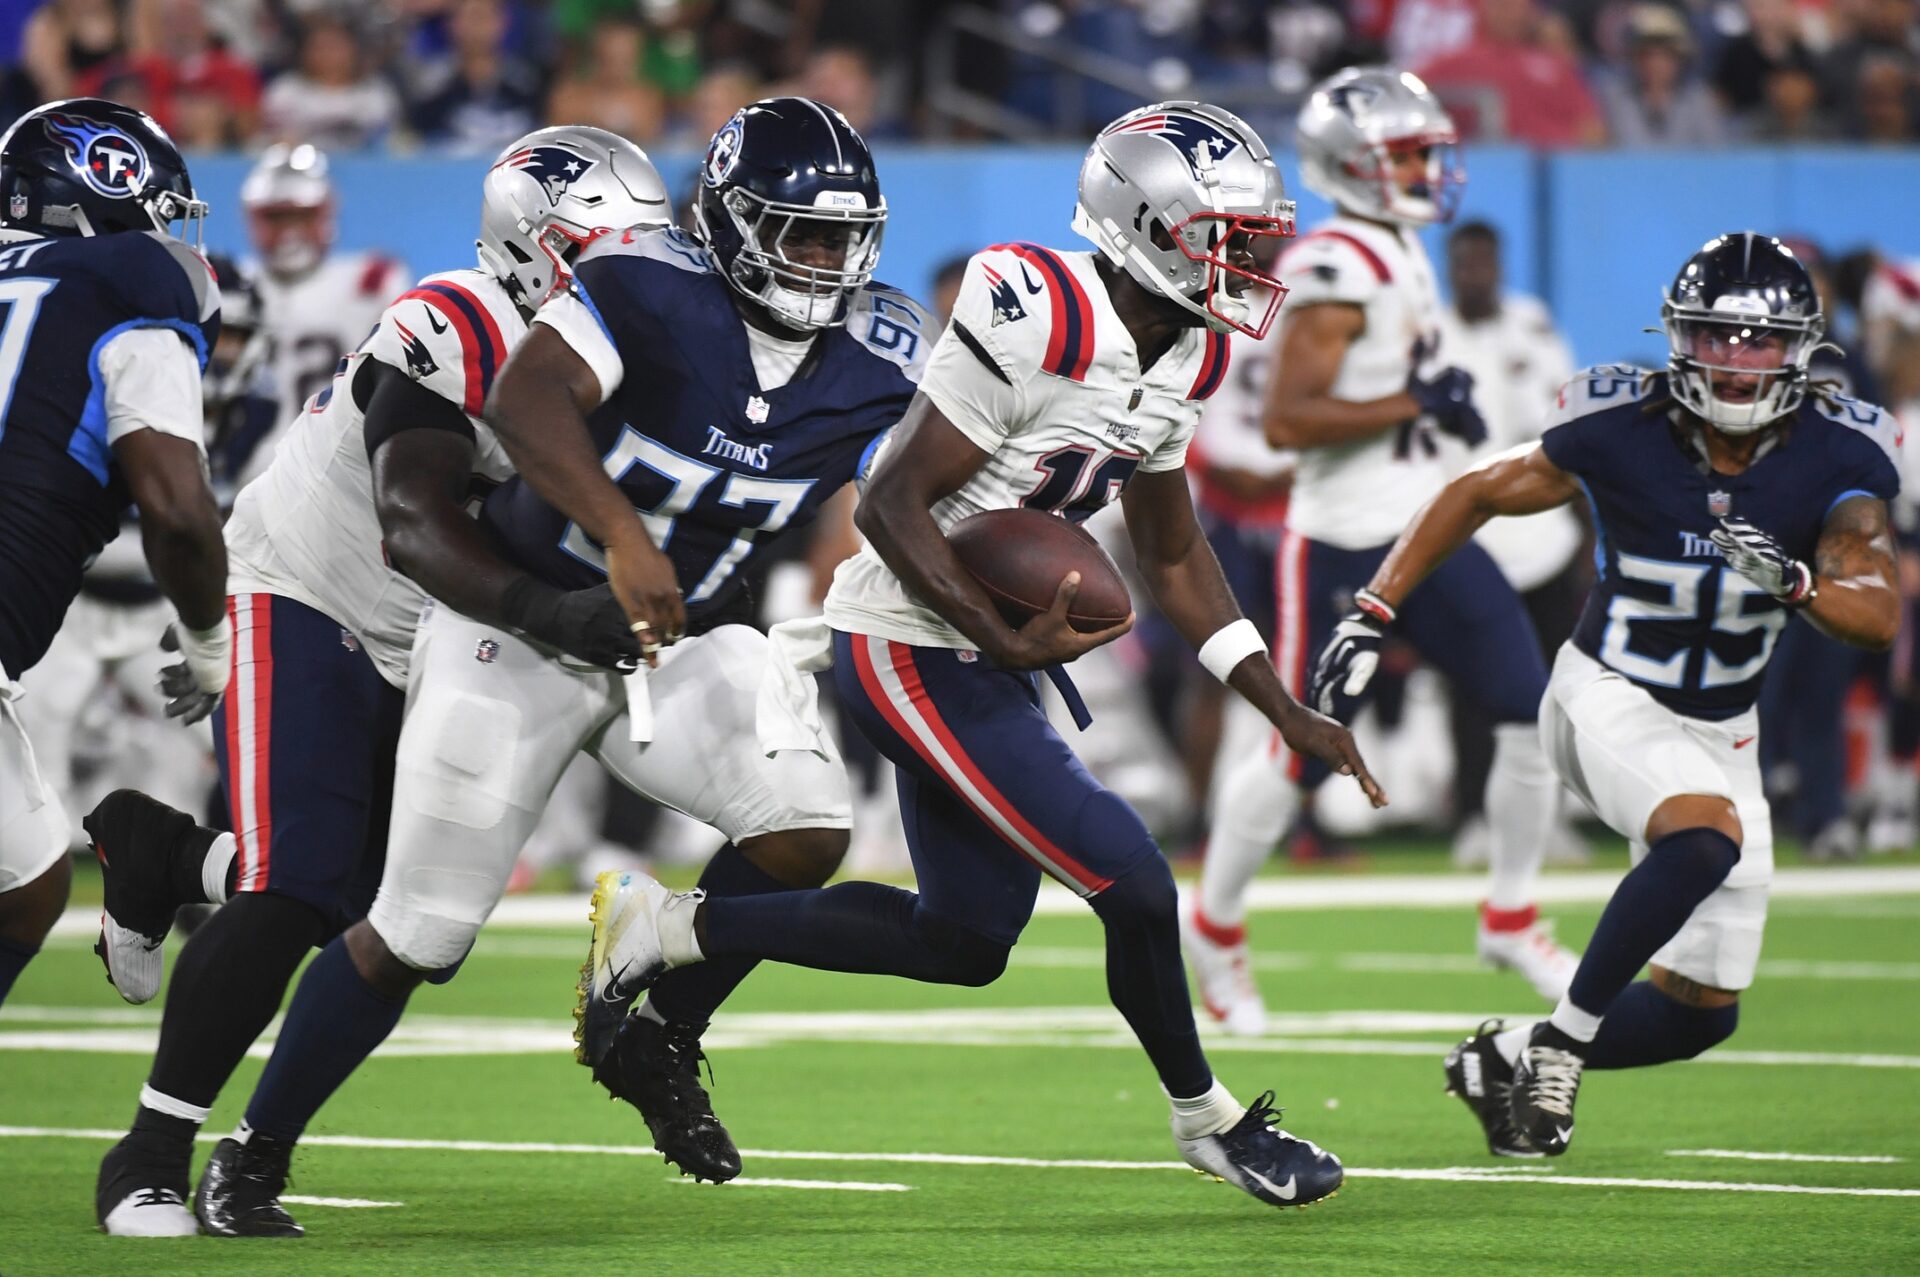 New England Patriots QB Malik Cunningham (16) runs with the ball against the Tennessee Titans.